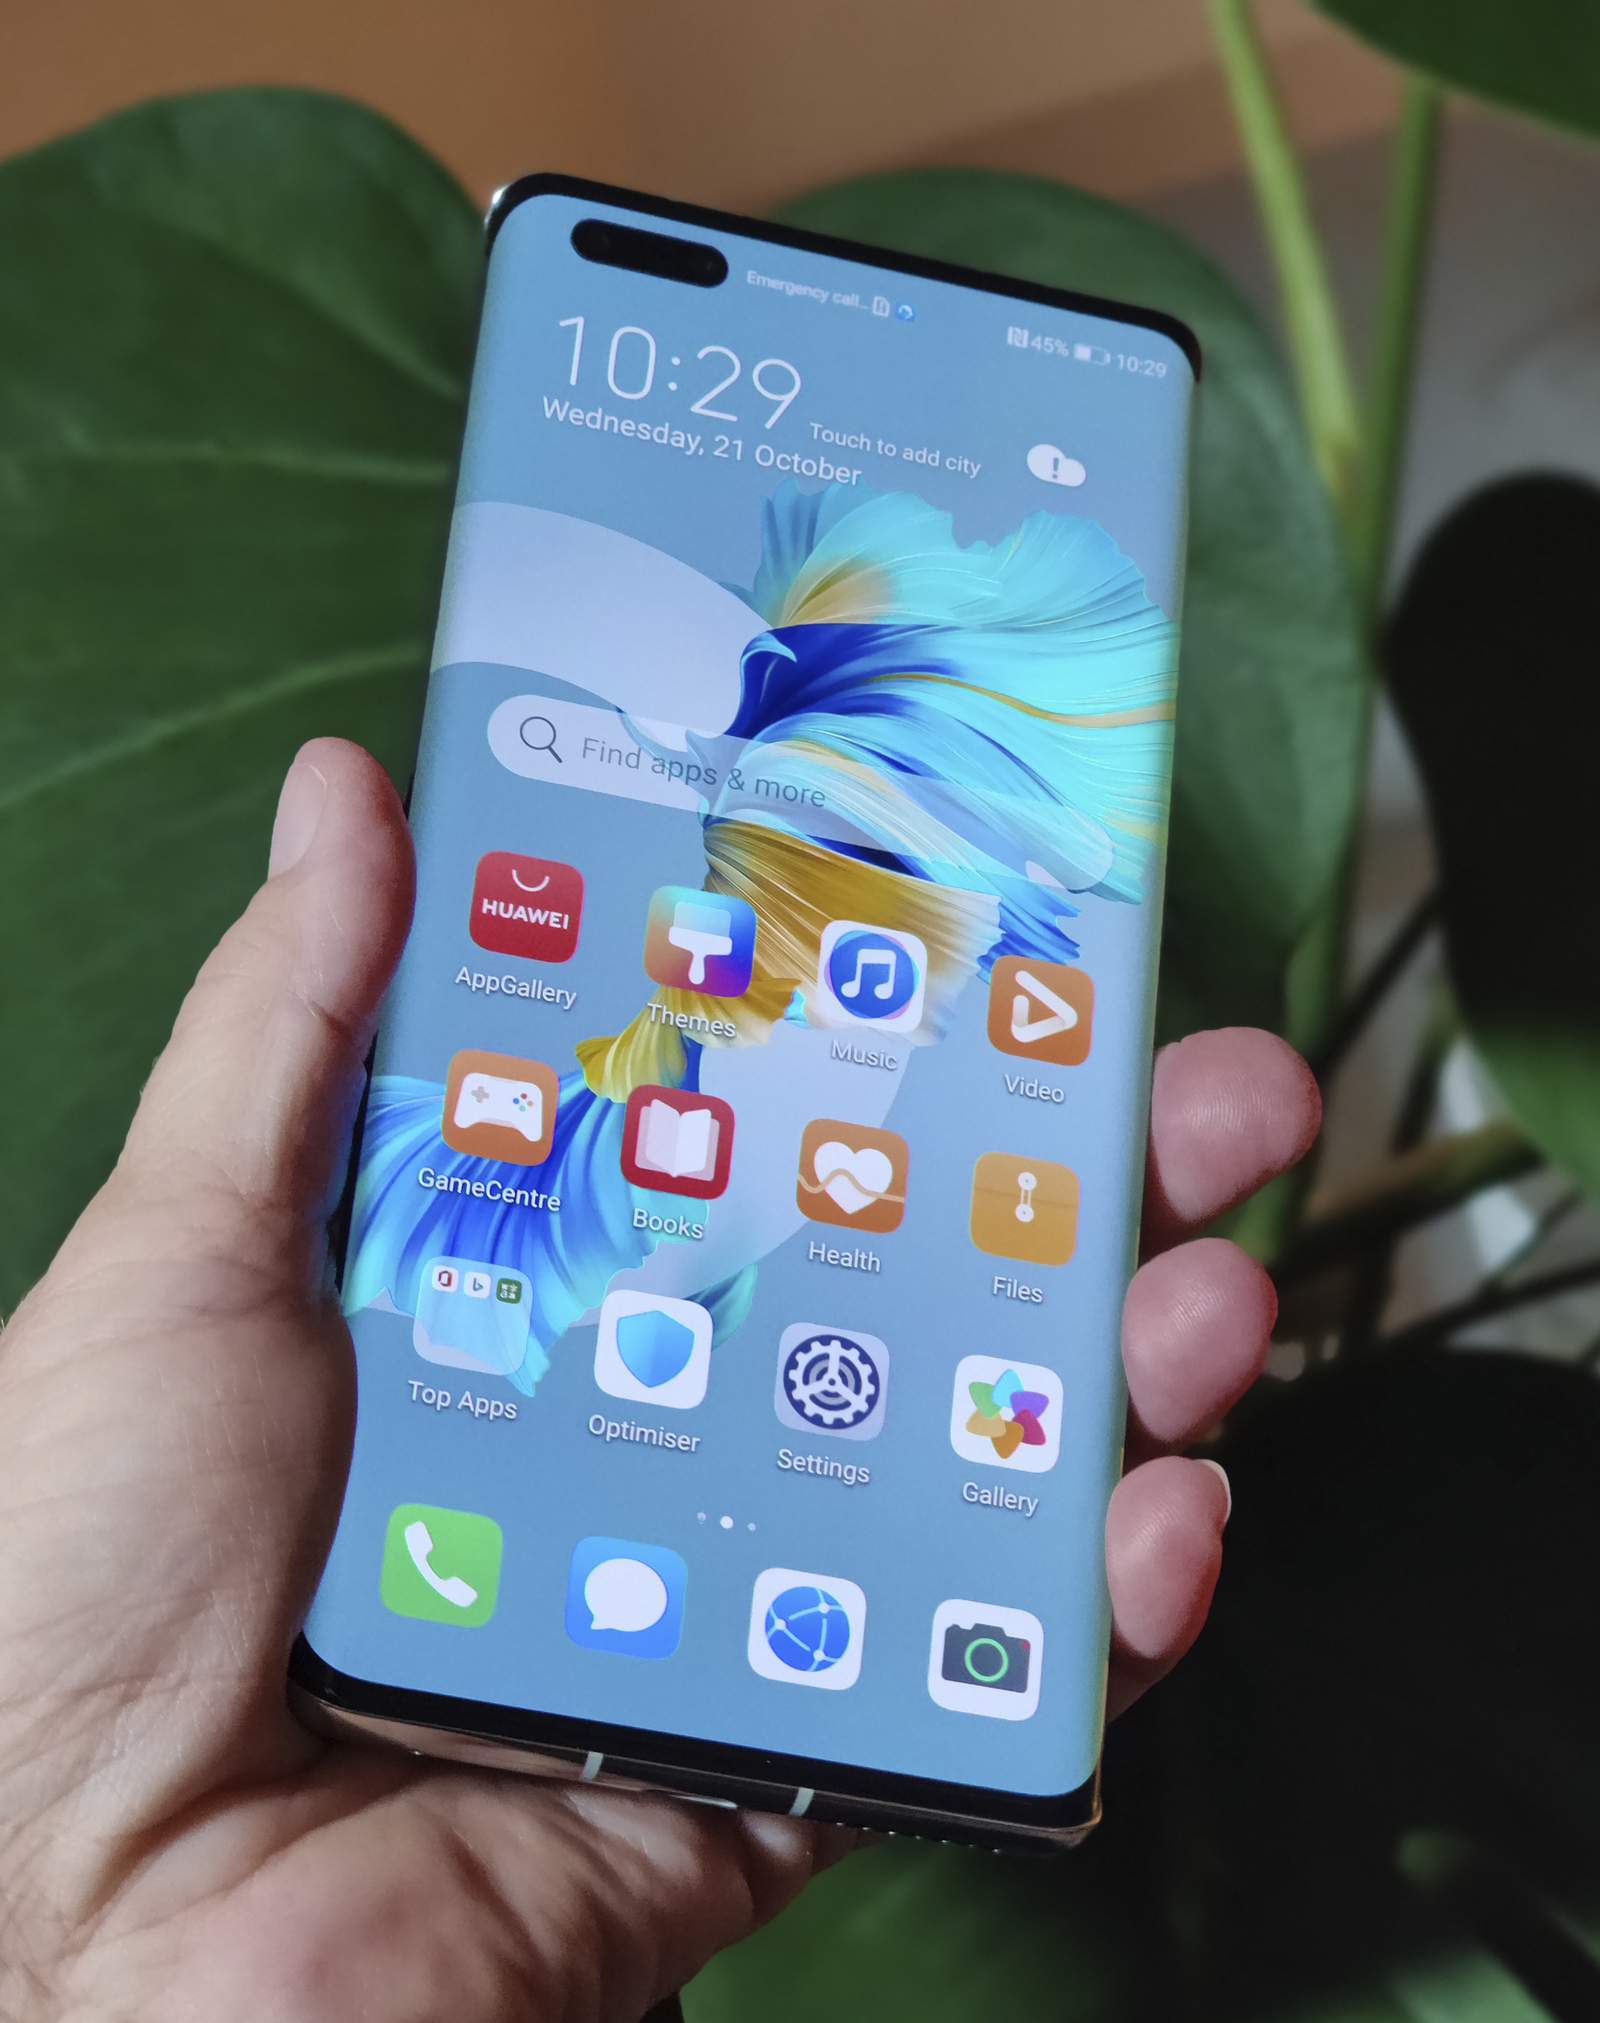 New Huawei phone comes at crucial time for Chinese company